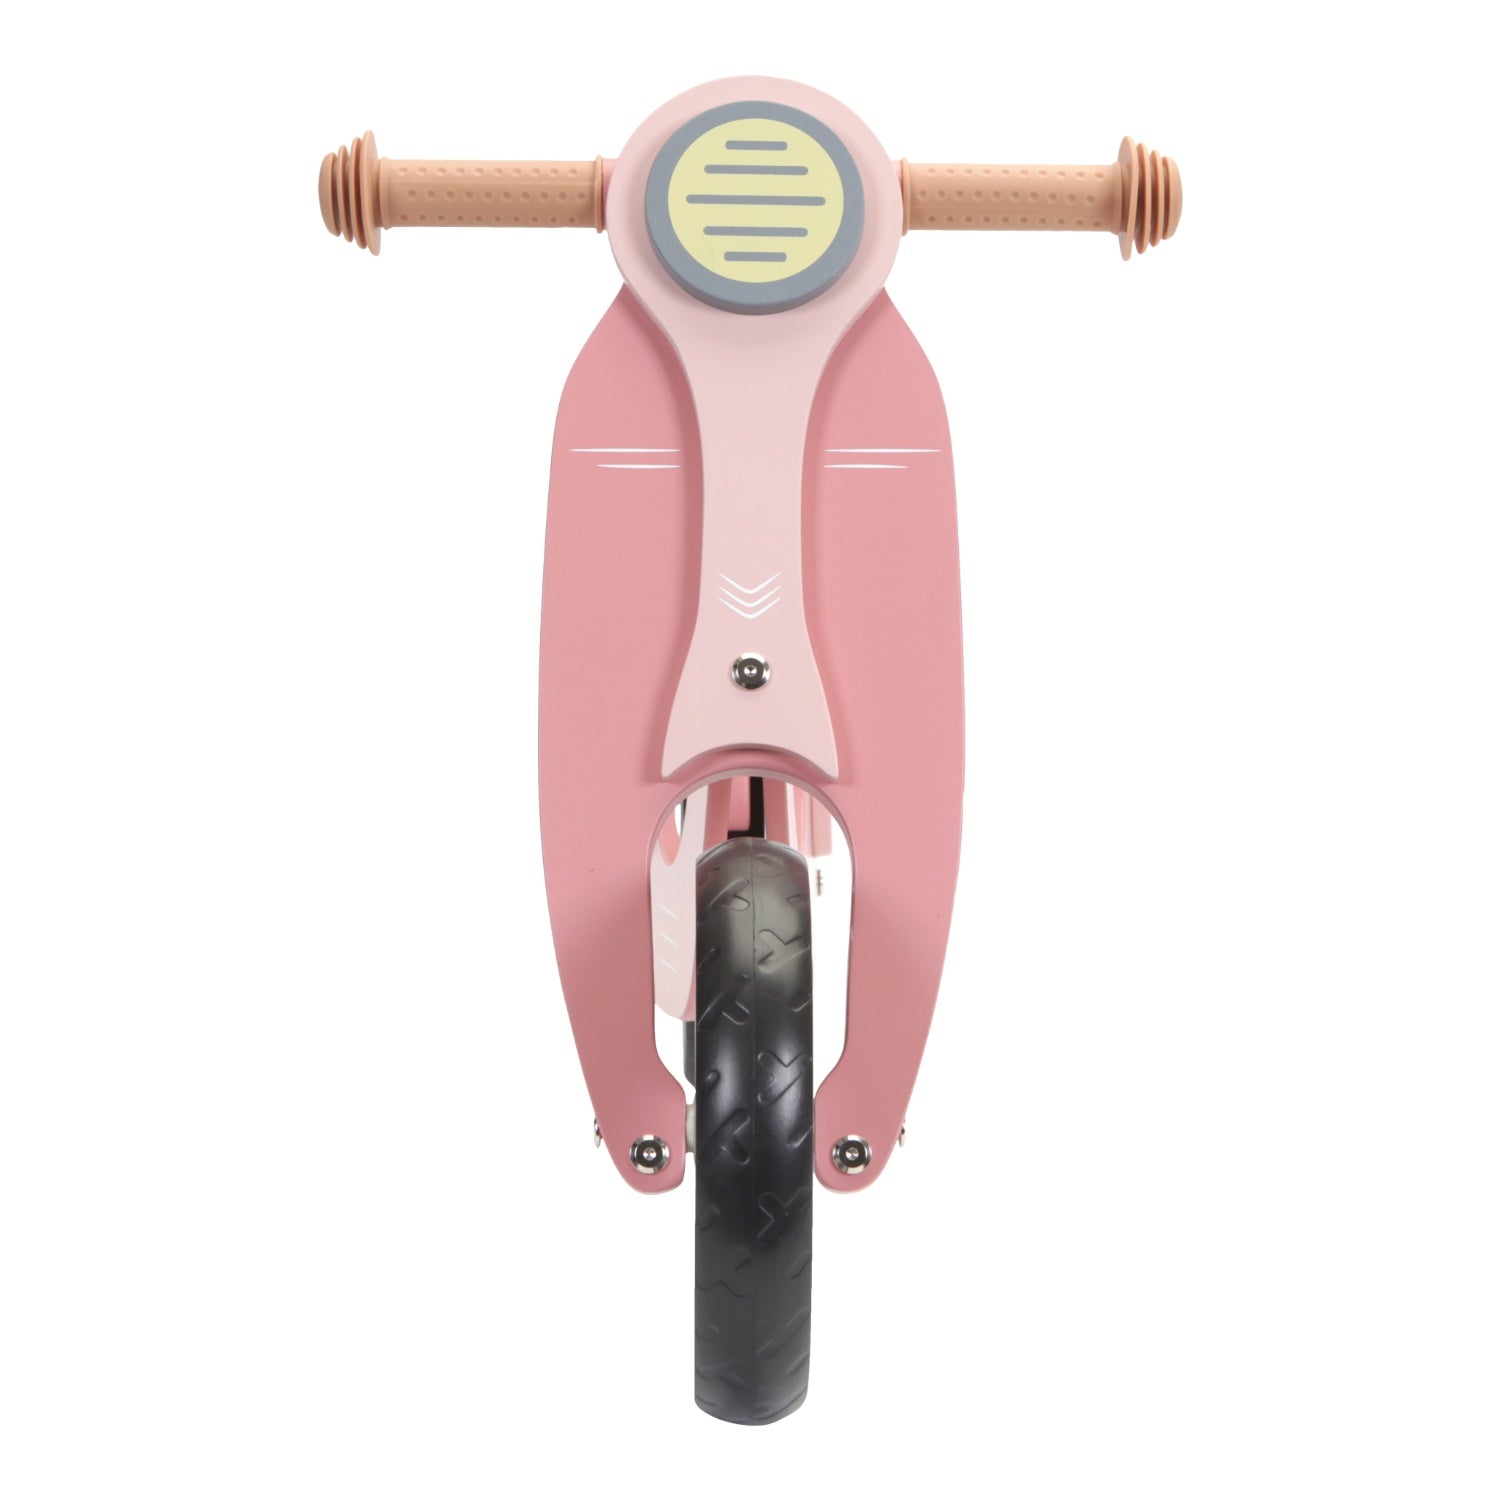 Little Dutch Balance Bike Scooter Pink | Riding Toy for Kids | BeoVERDE Ireland